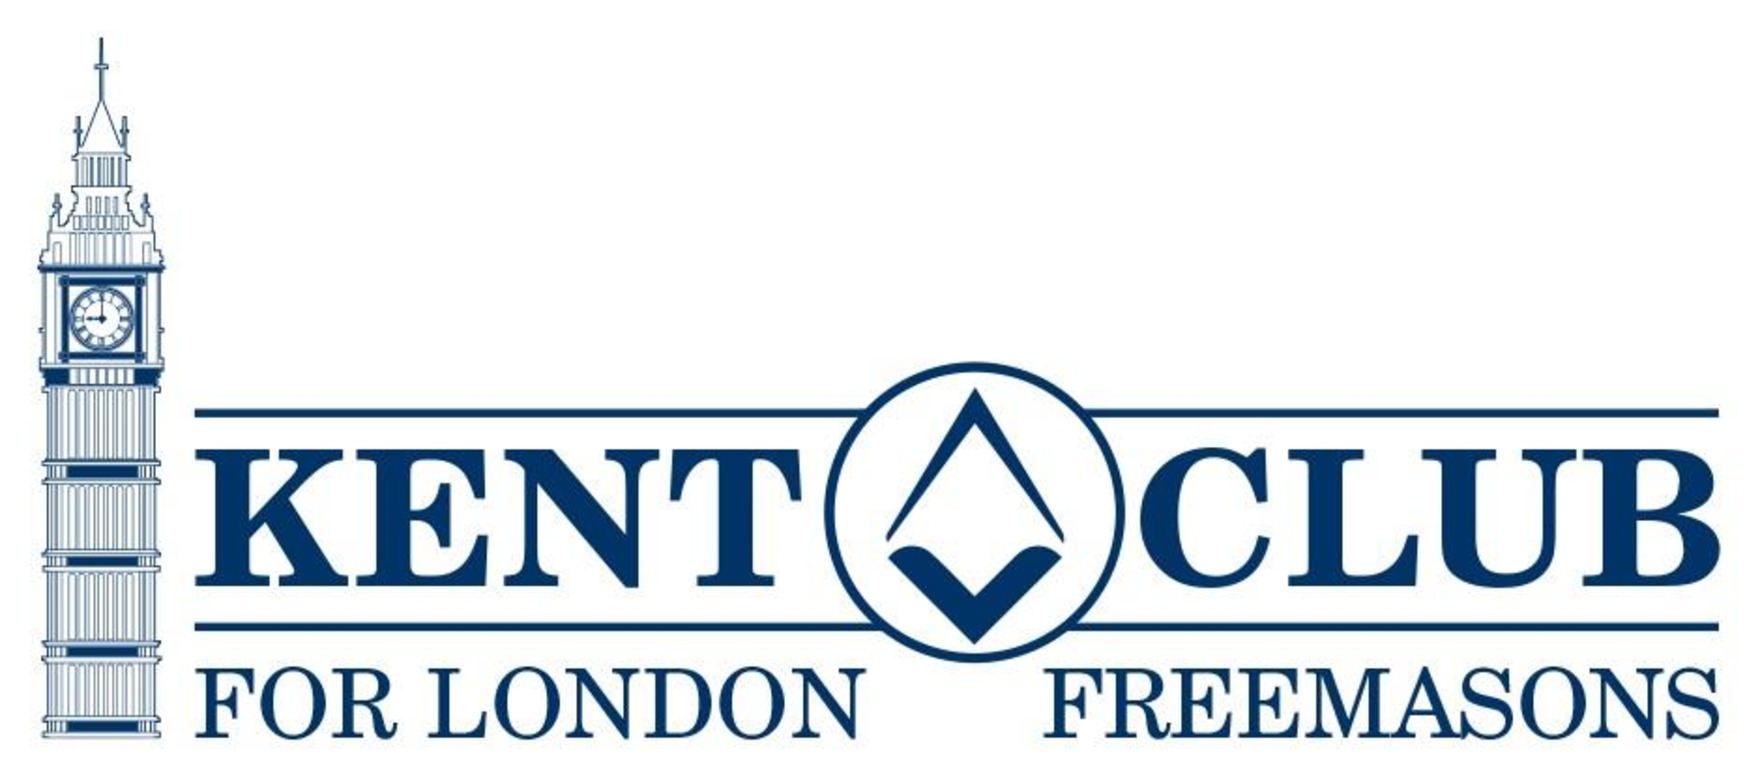 The Kent Club for London Freemasons Annual Running Event 2018